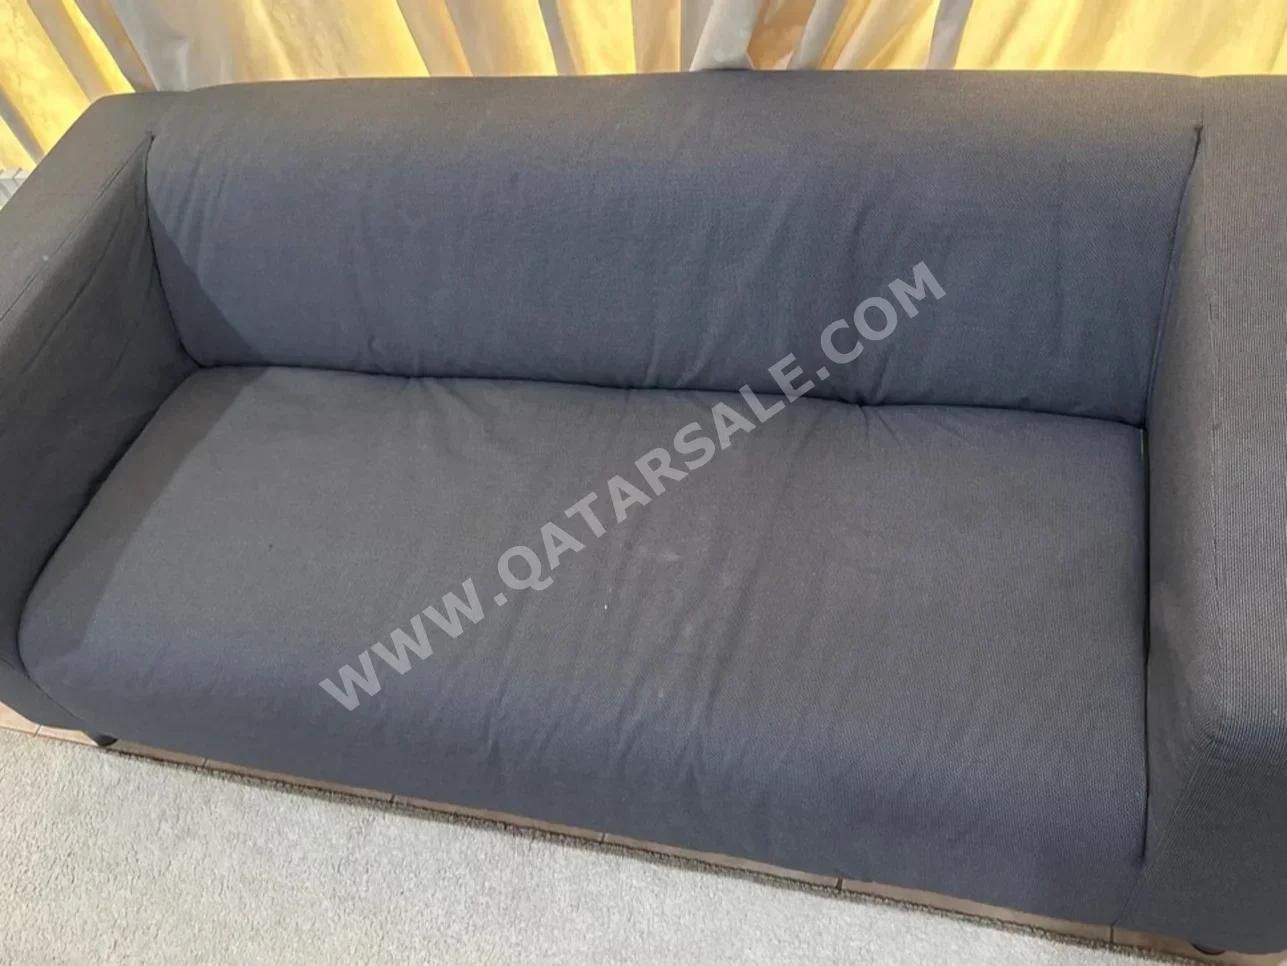 Sofas, Couches & Chairs IKEA  3-Seat Sofa  - Cotton / Cotton Blend  - Gray  - With Table